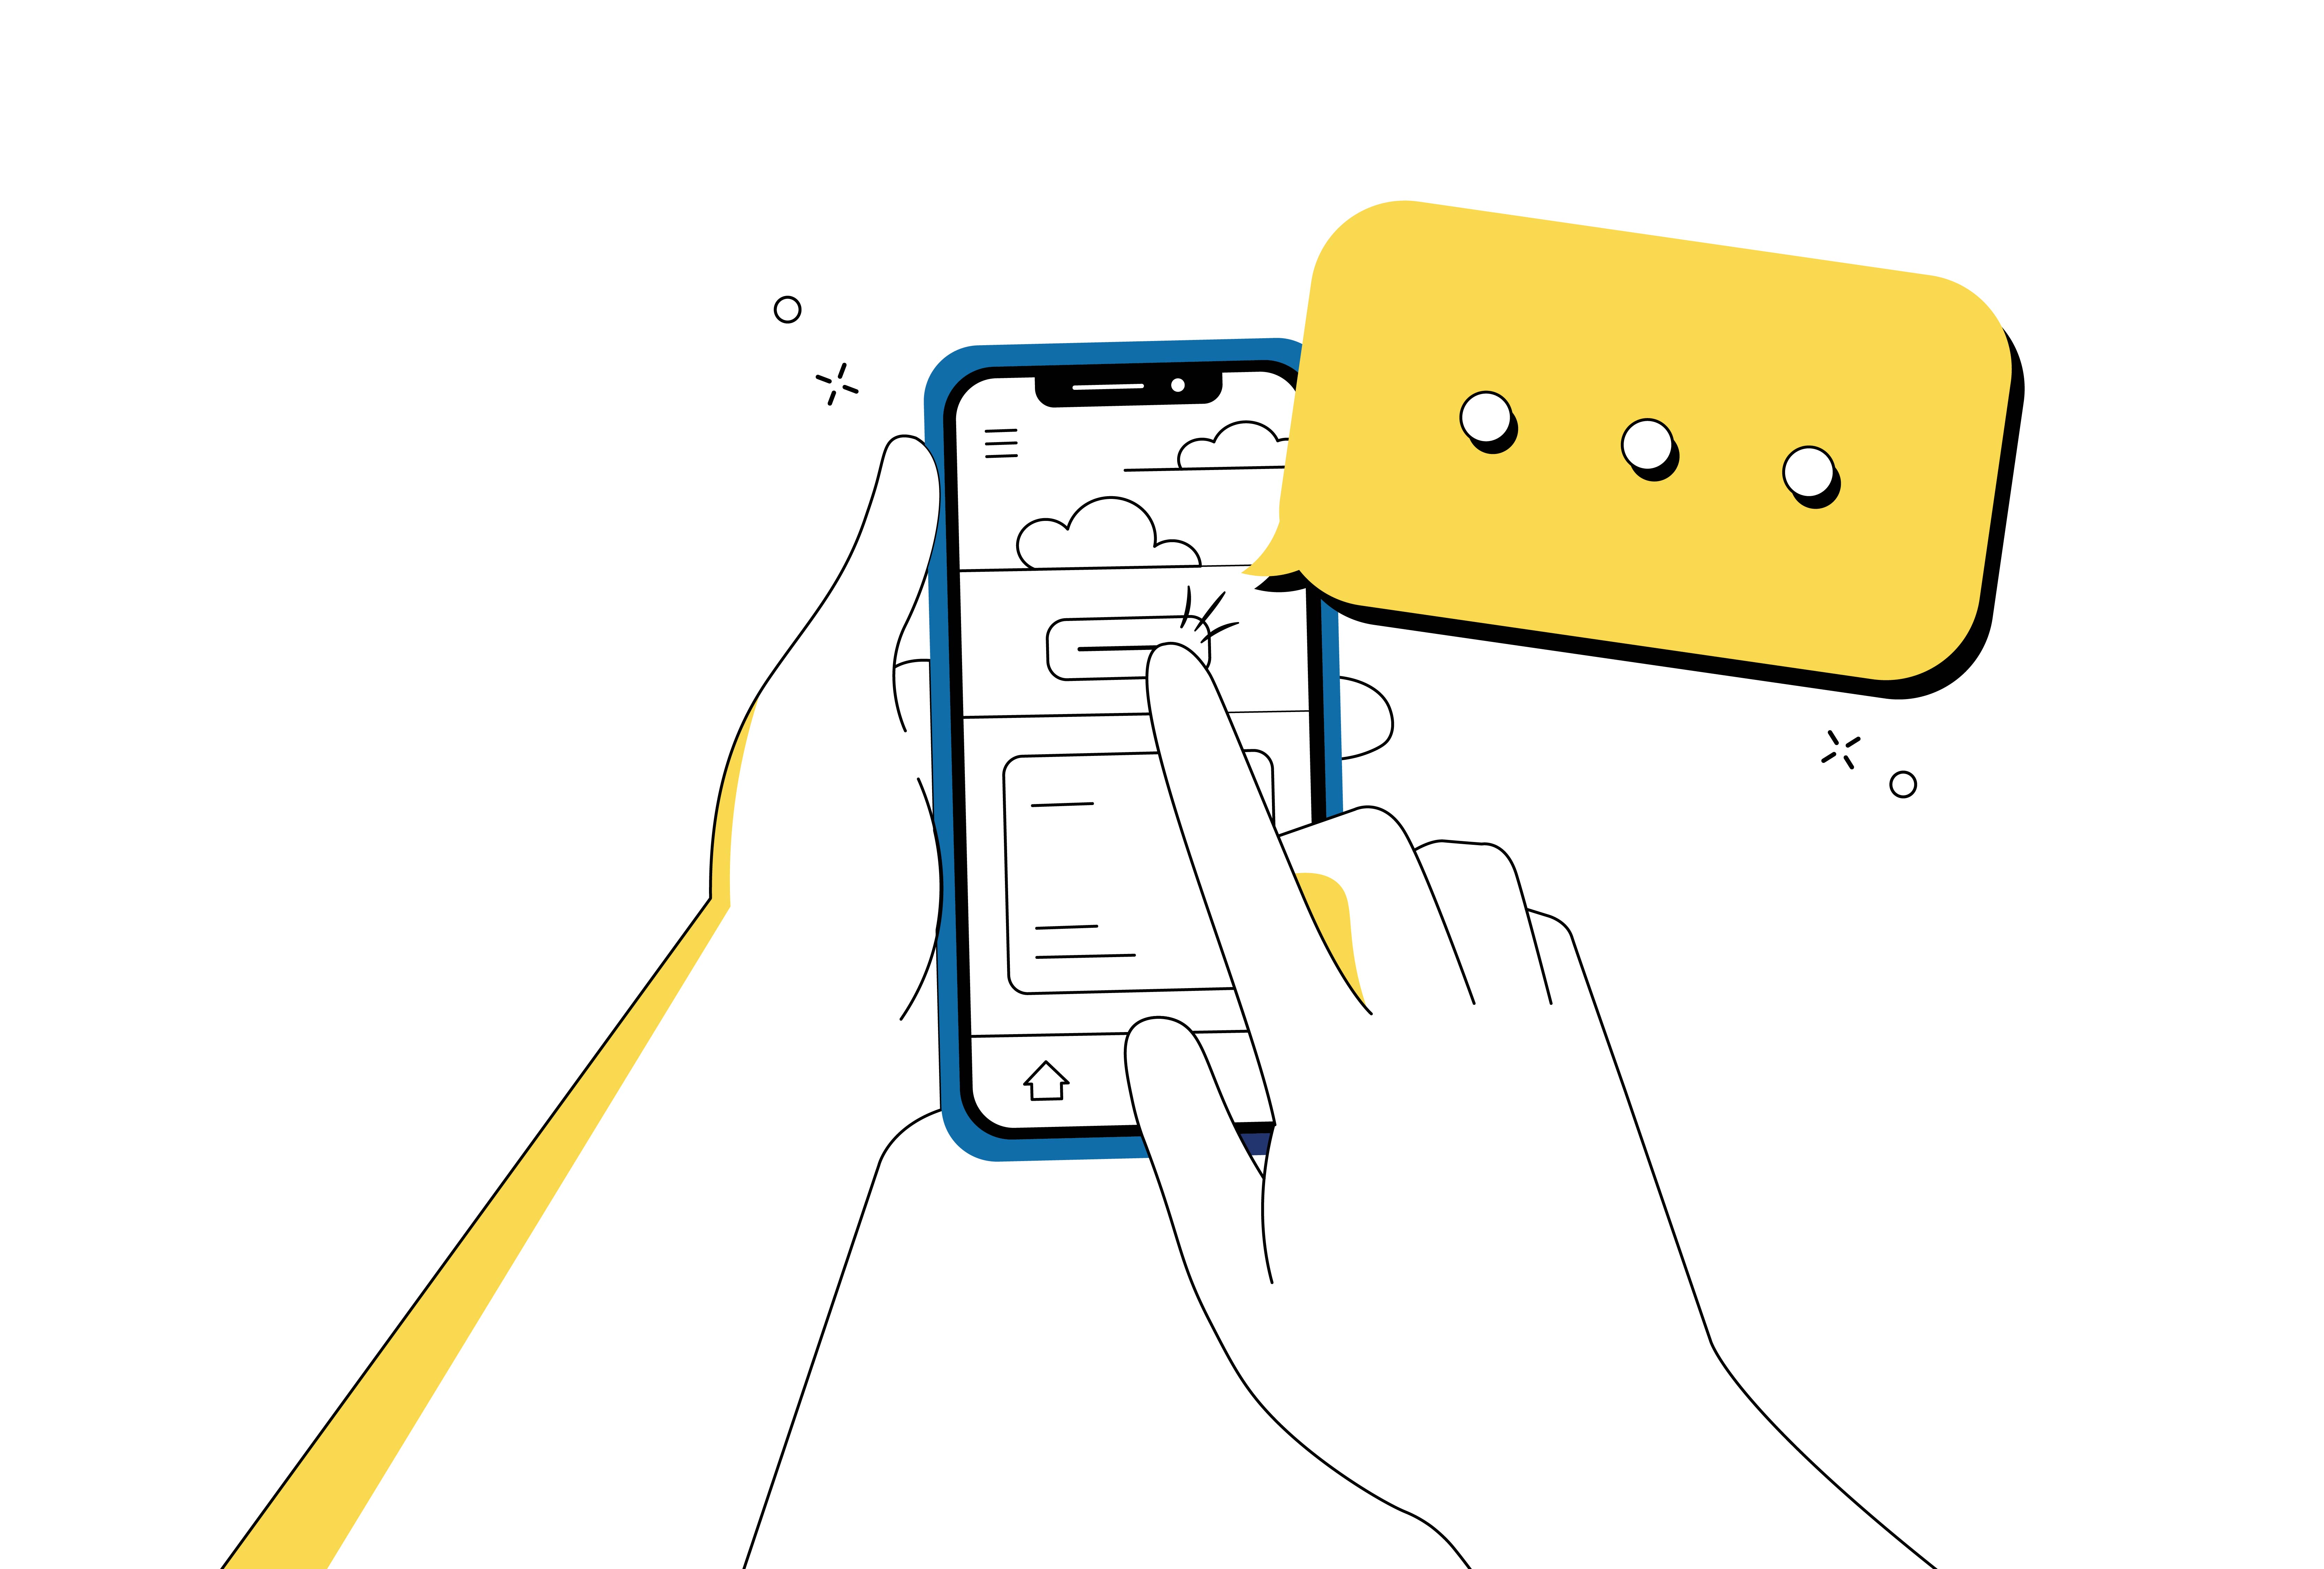 Digital illustration of hands holding a phone and a speech bubble popping out of the screen